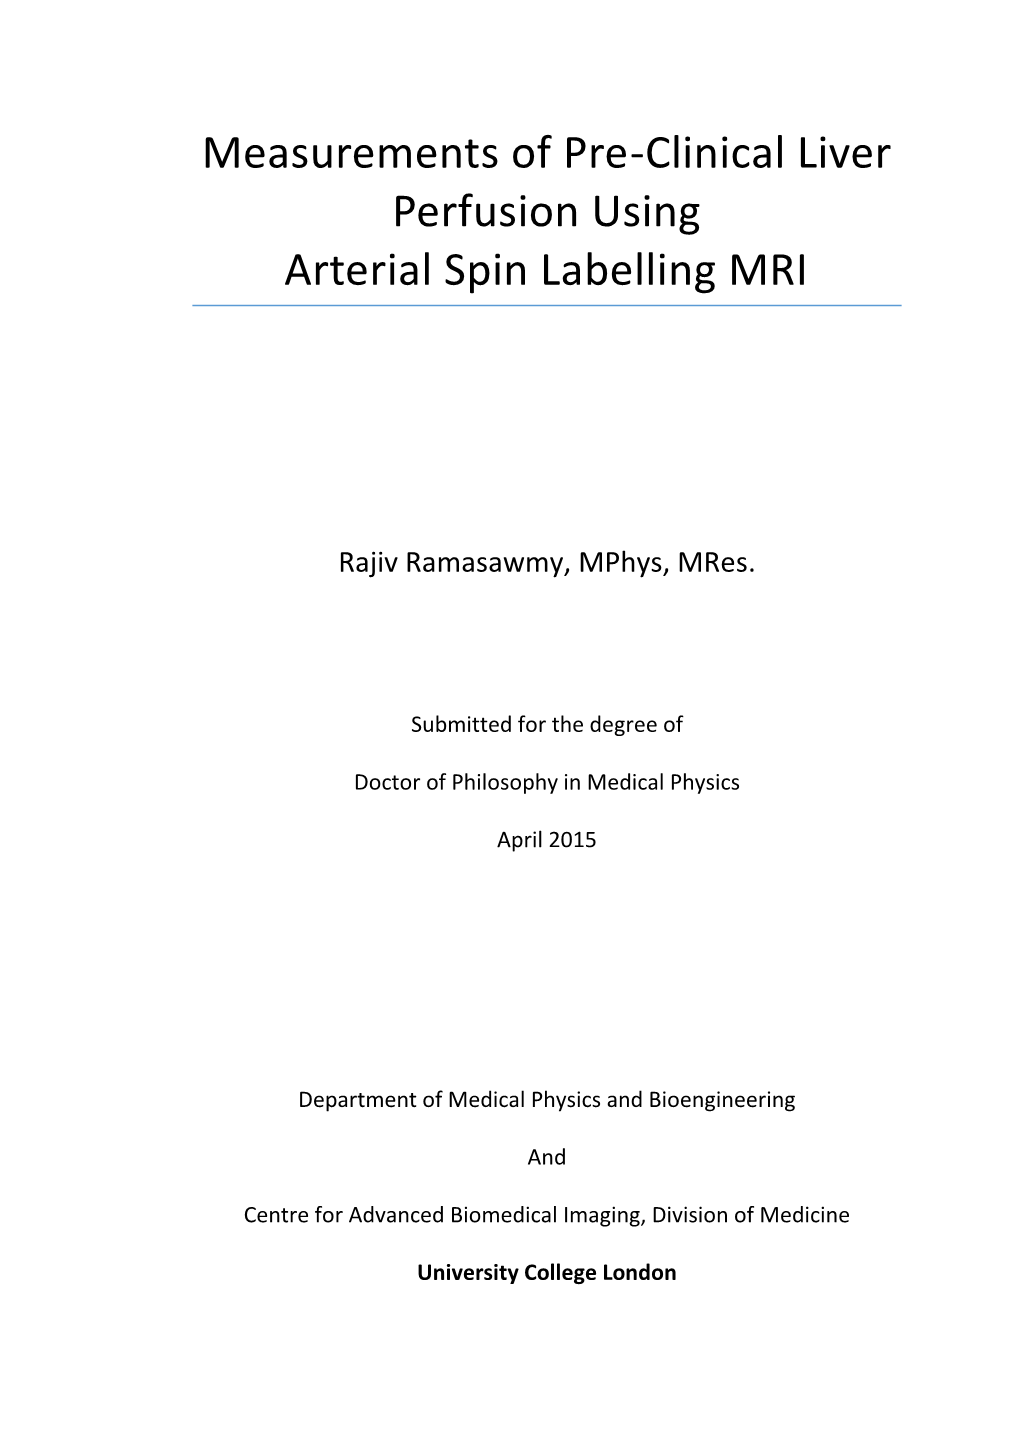 Measurements of Pre-Clinical Liver Perfusion Using Arterial Spin Labelling MRI